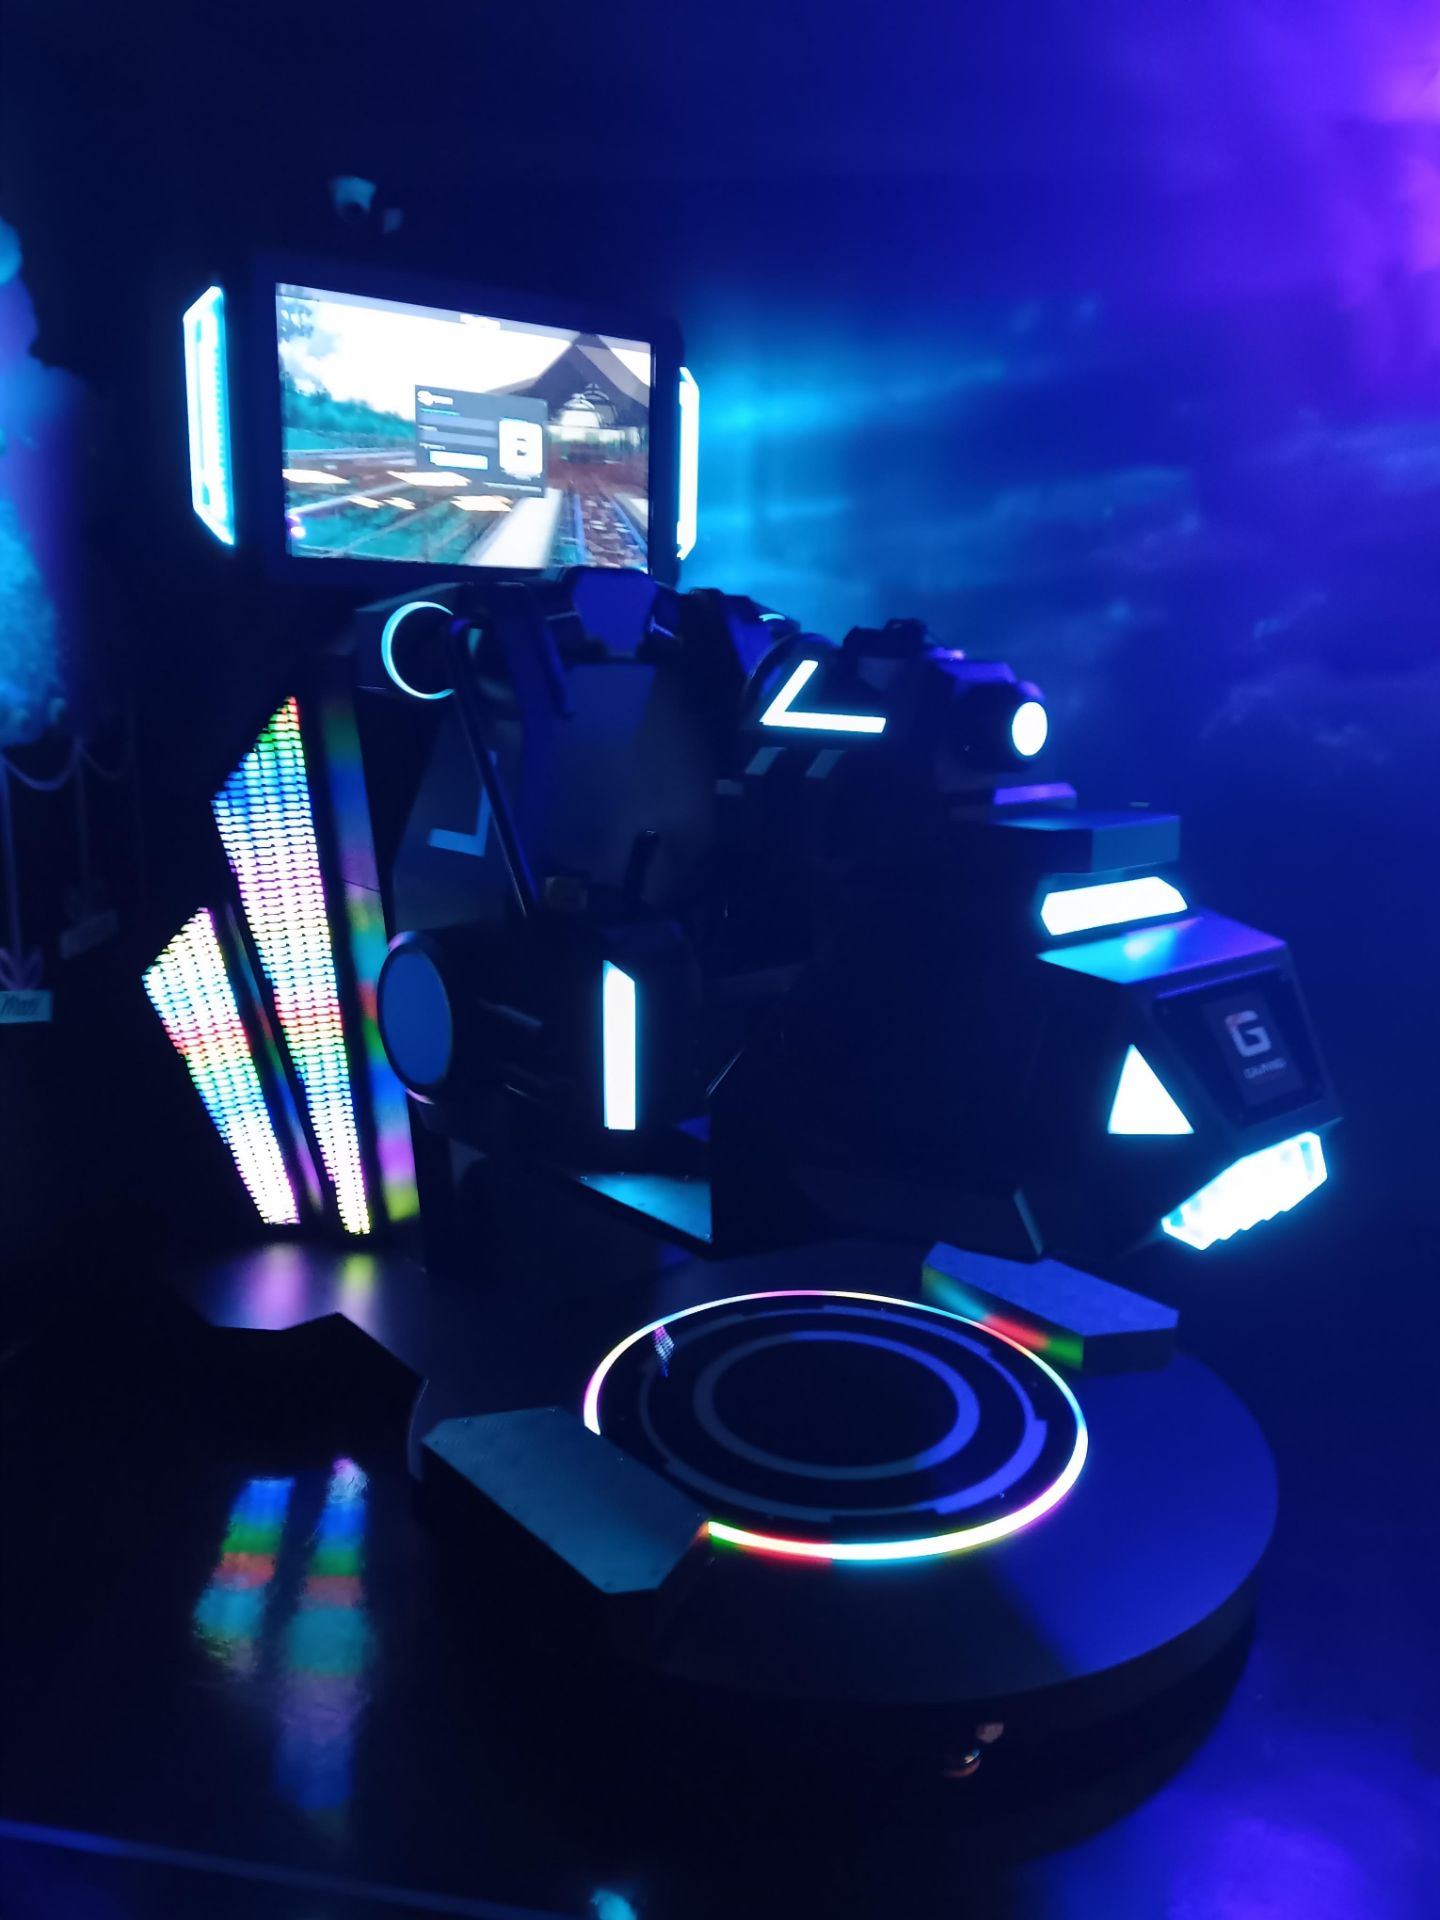 Movie Power 360 Degree VR Racing Flight Simulator – Cost New £30,000 – Buyer to Disconnect & - Image 2 of 7